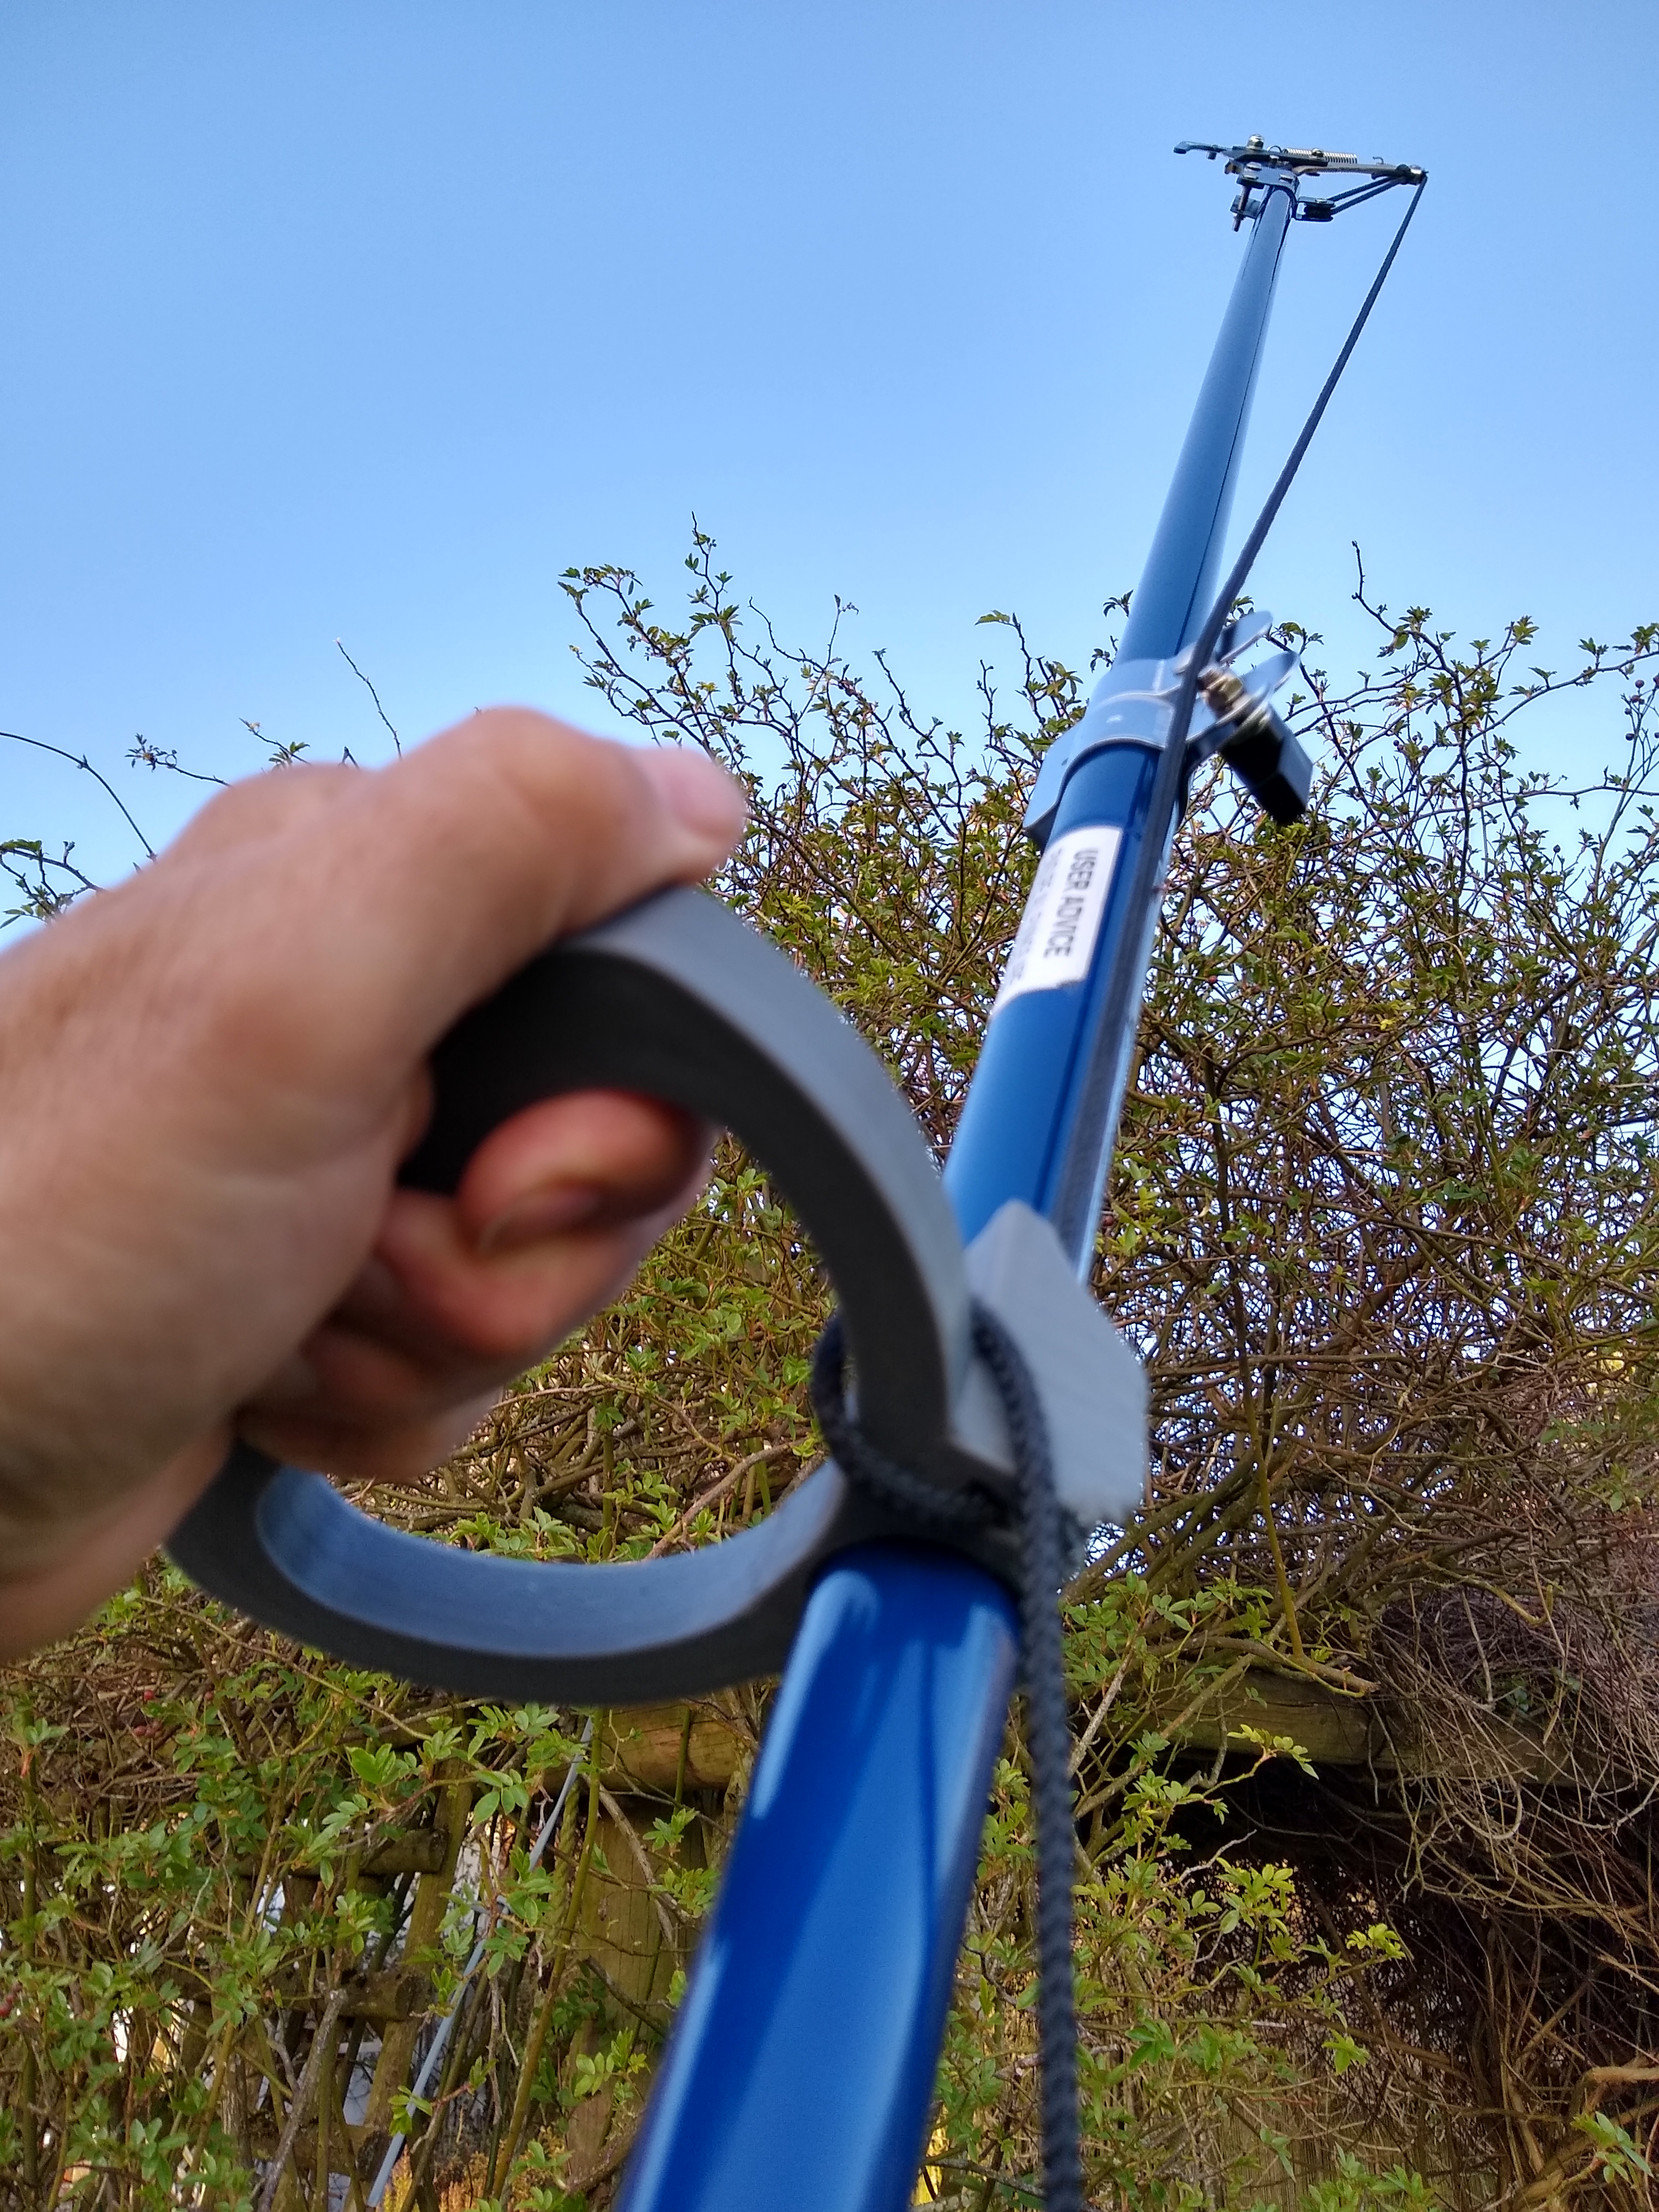 Device to hold and snip a long handled pruner